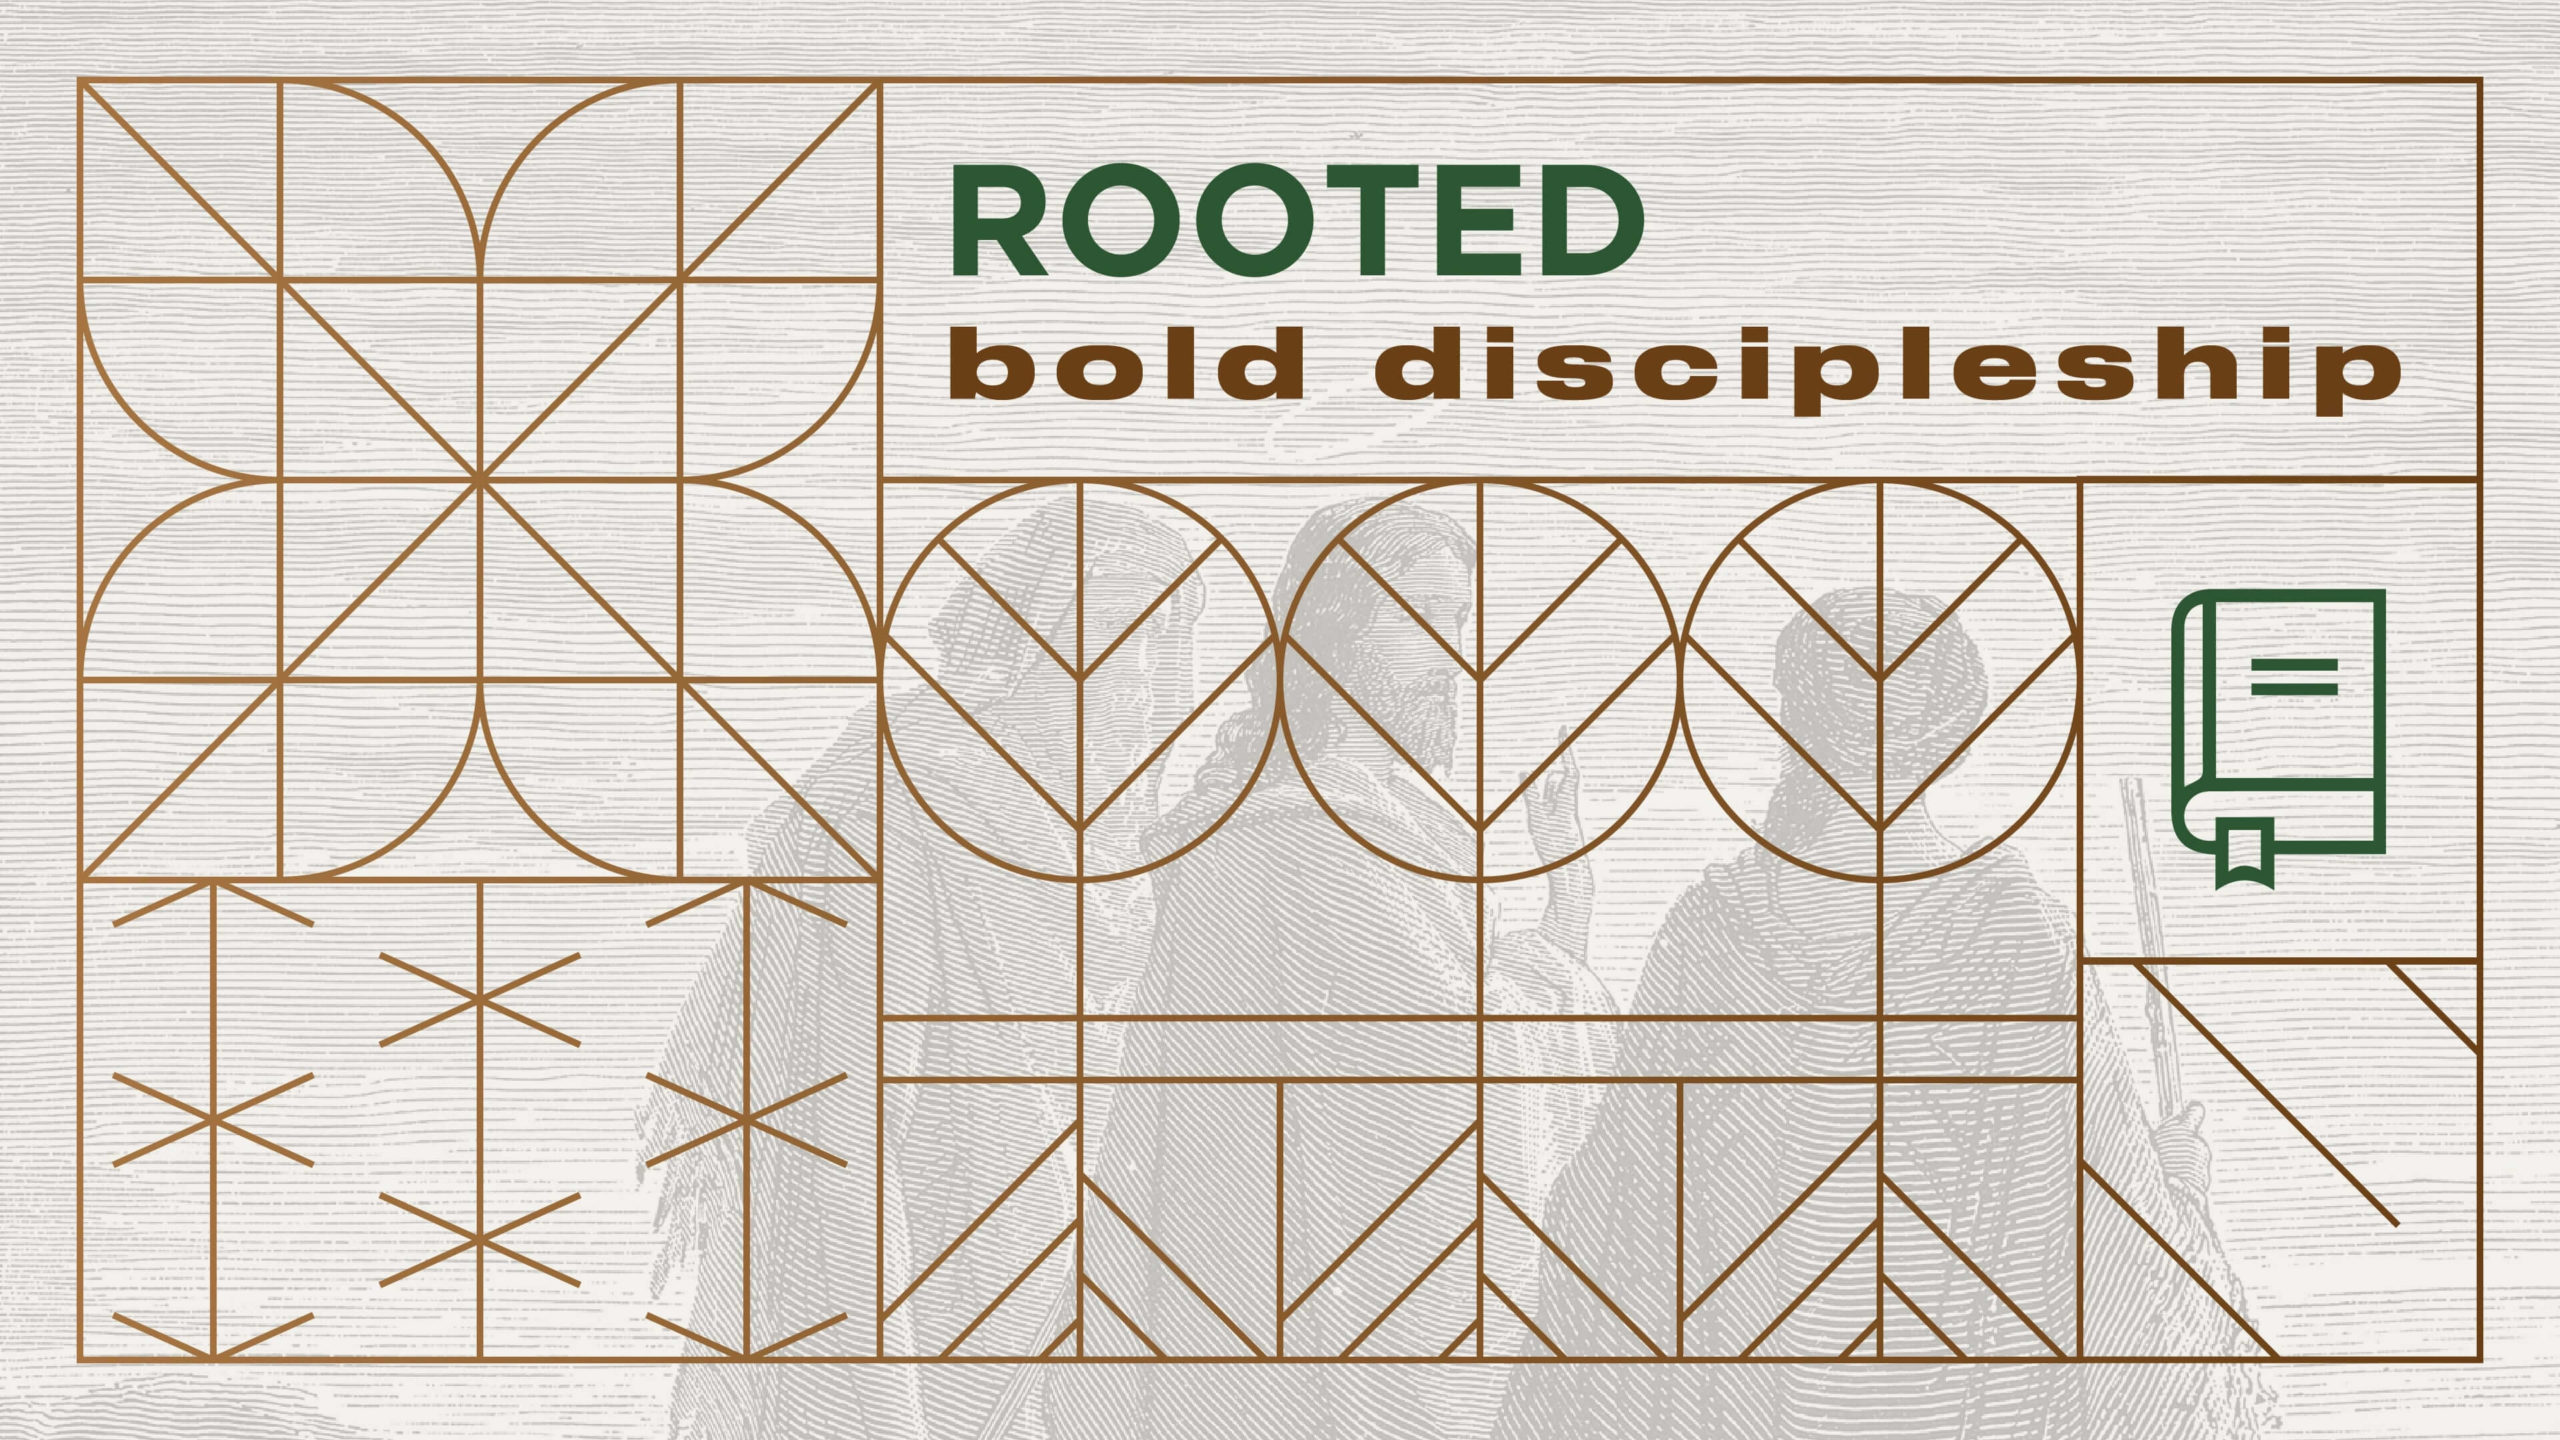 Rooted: What is a Disciple?